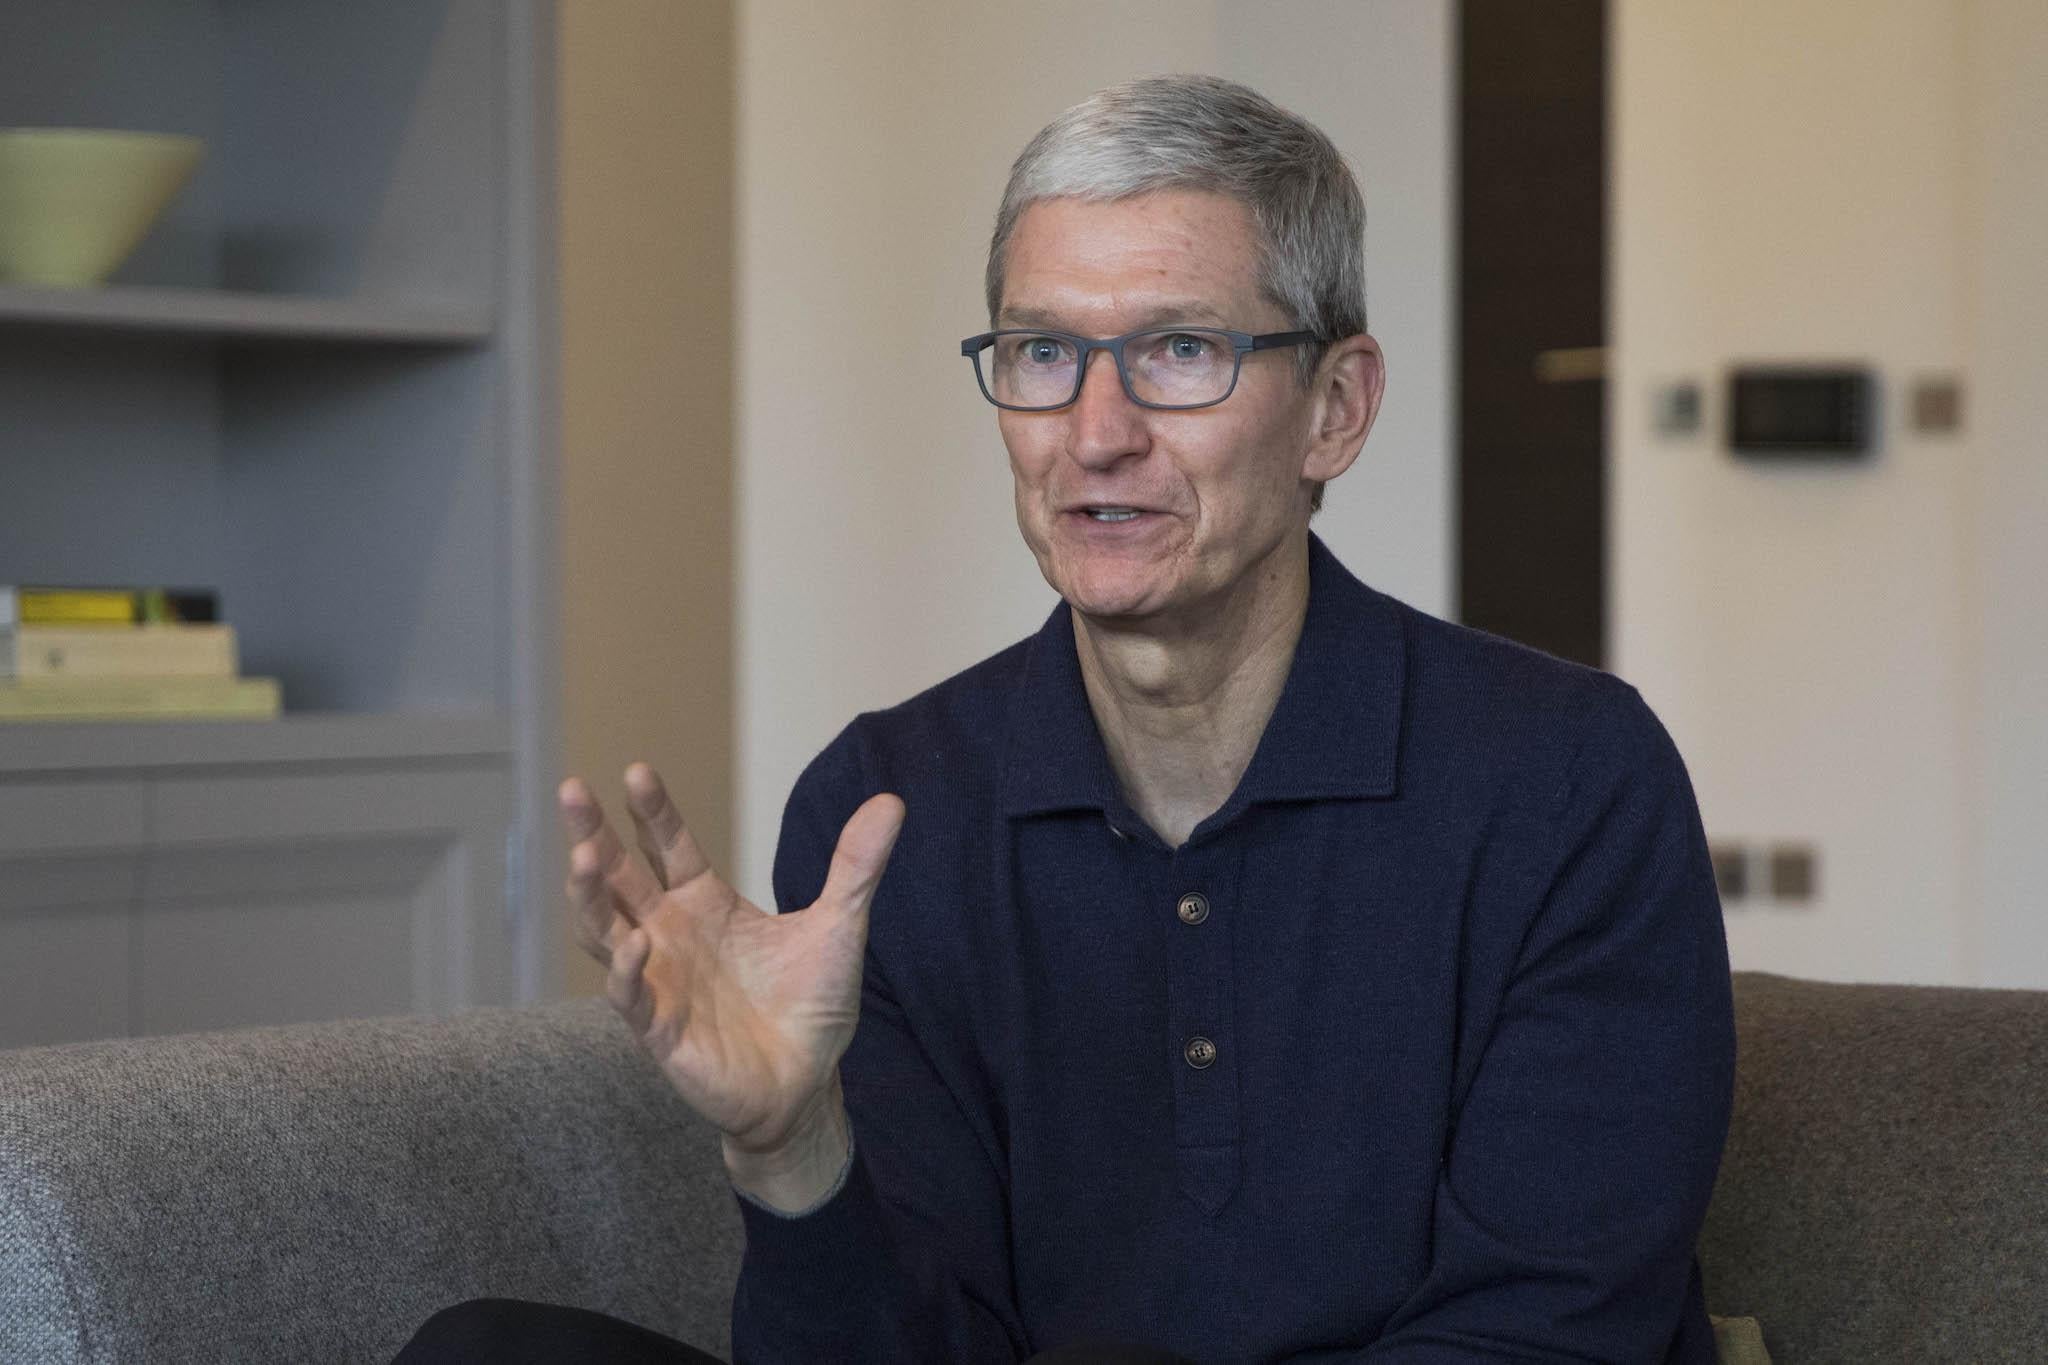 Apple CEO Tim Cook speaks to The Independent in London in 2017 about iPhones, AR, and why things are getting better